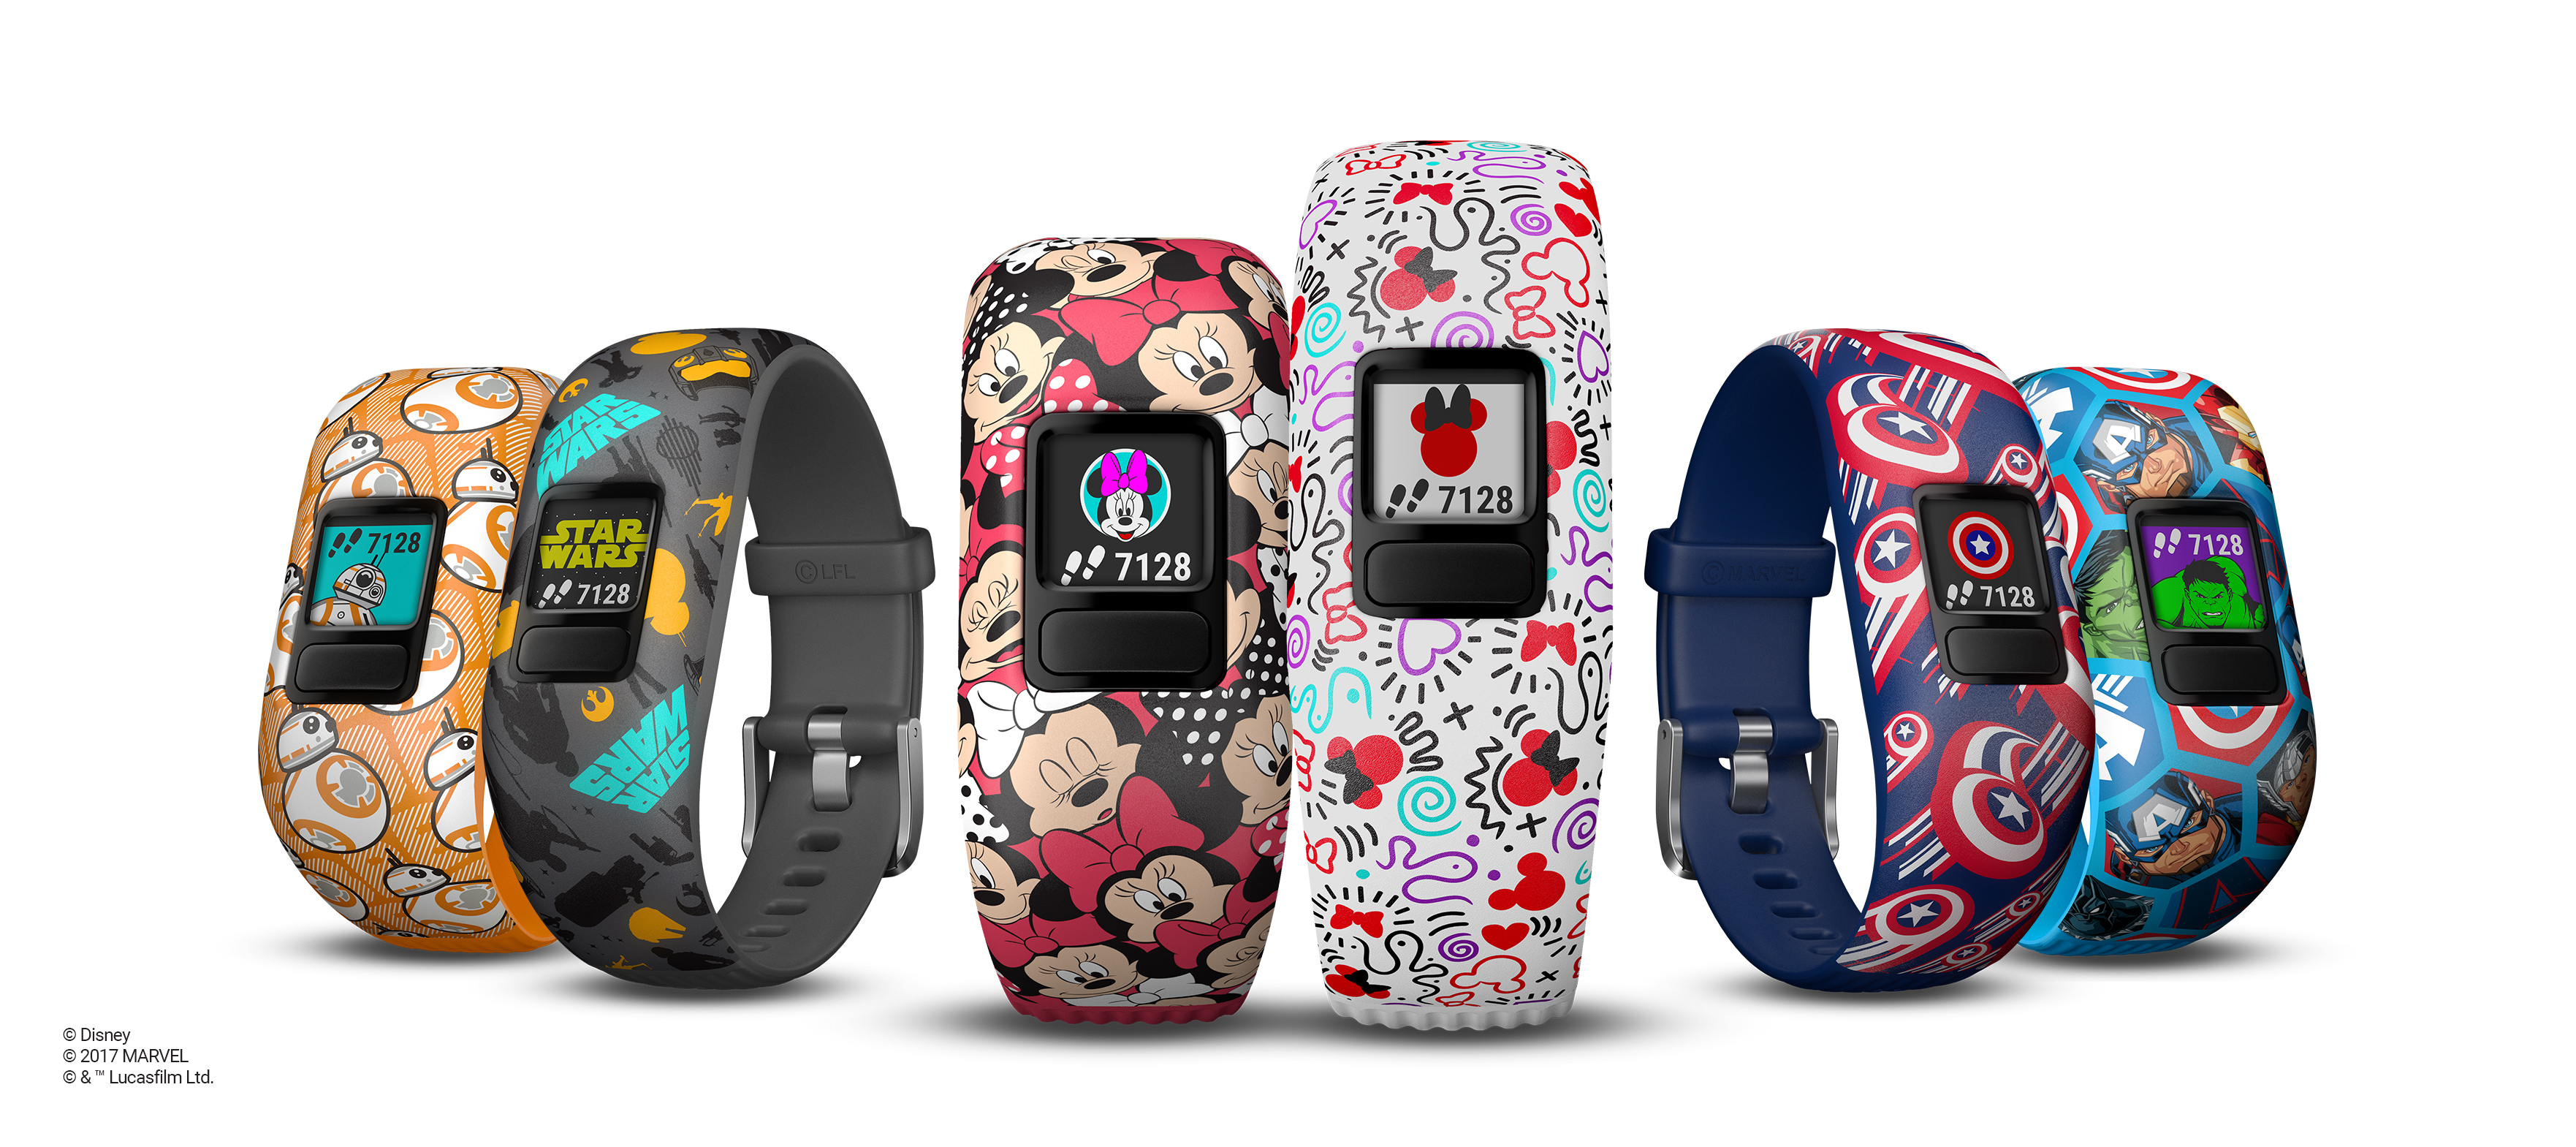 Emulatie Gevlekt Startpunt Garmin® and Disney bring motivation and imagination to the playground with  the introduction of the vívofit® jr. 2 activity tracker for kids featuring  Disney, Star Wars and Marvel | Garmin Blog